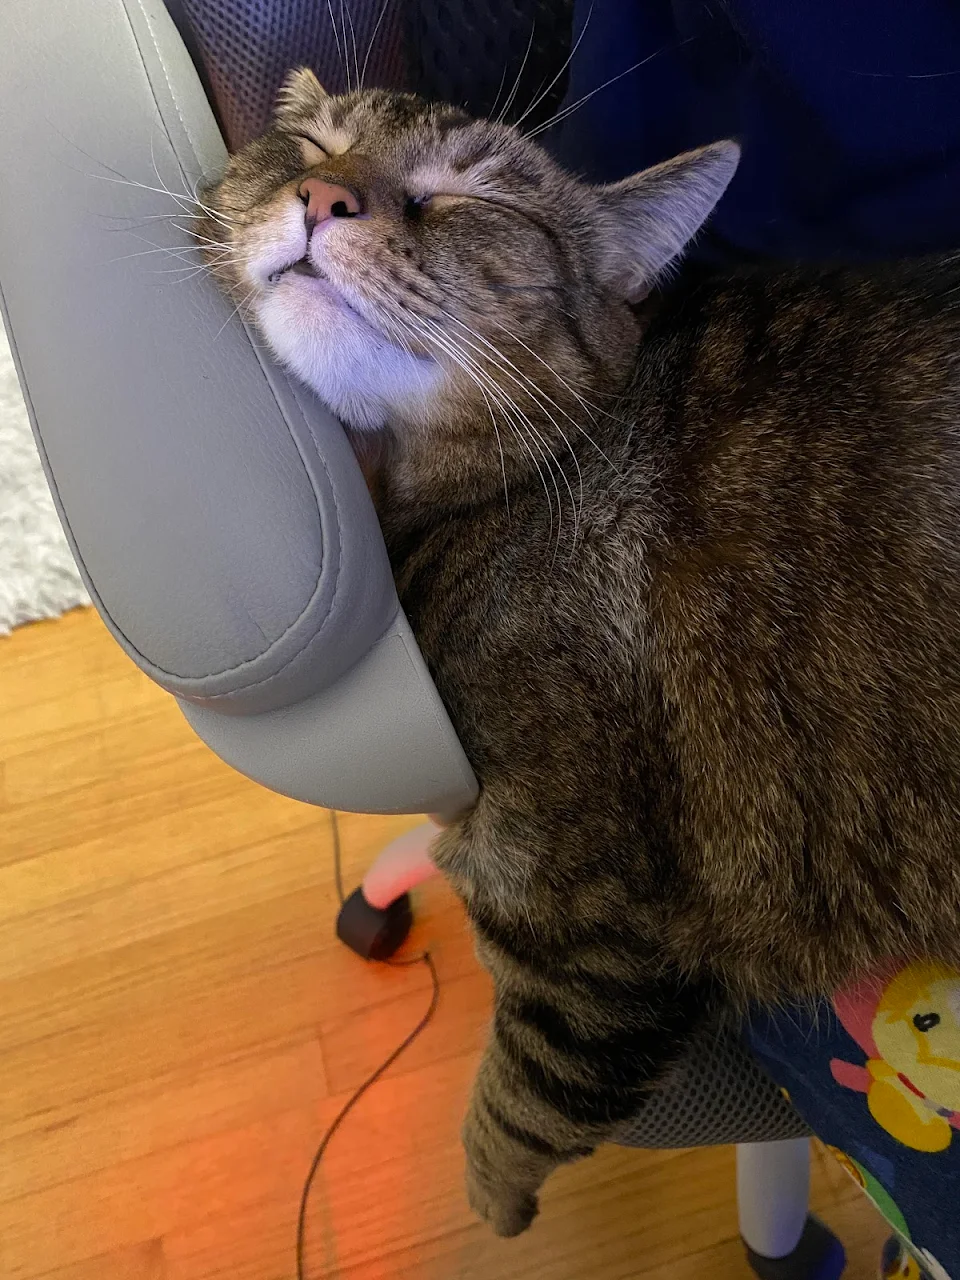 My cats favorite thing is laying on my lap and using the arm rest as a pillow. It looks so uncomfortable but she stays like that for hours lol